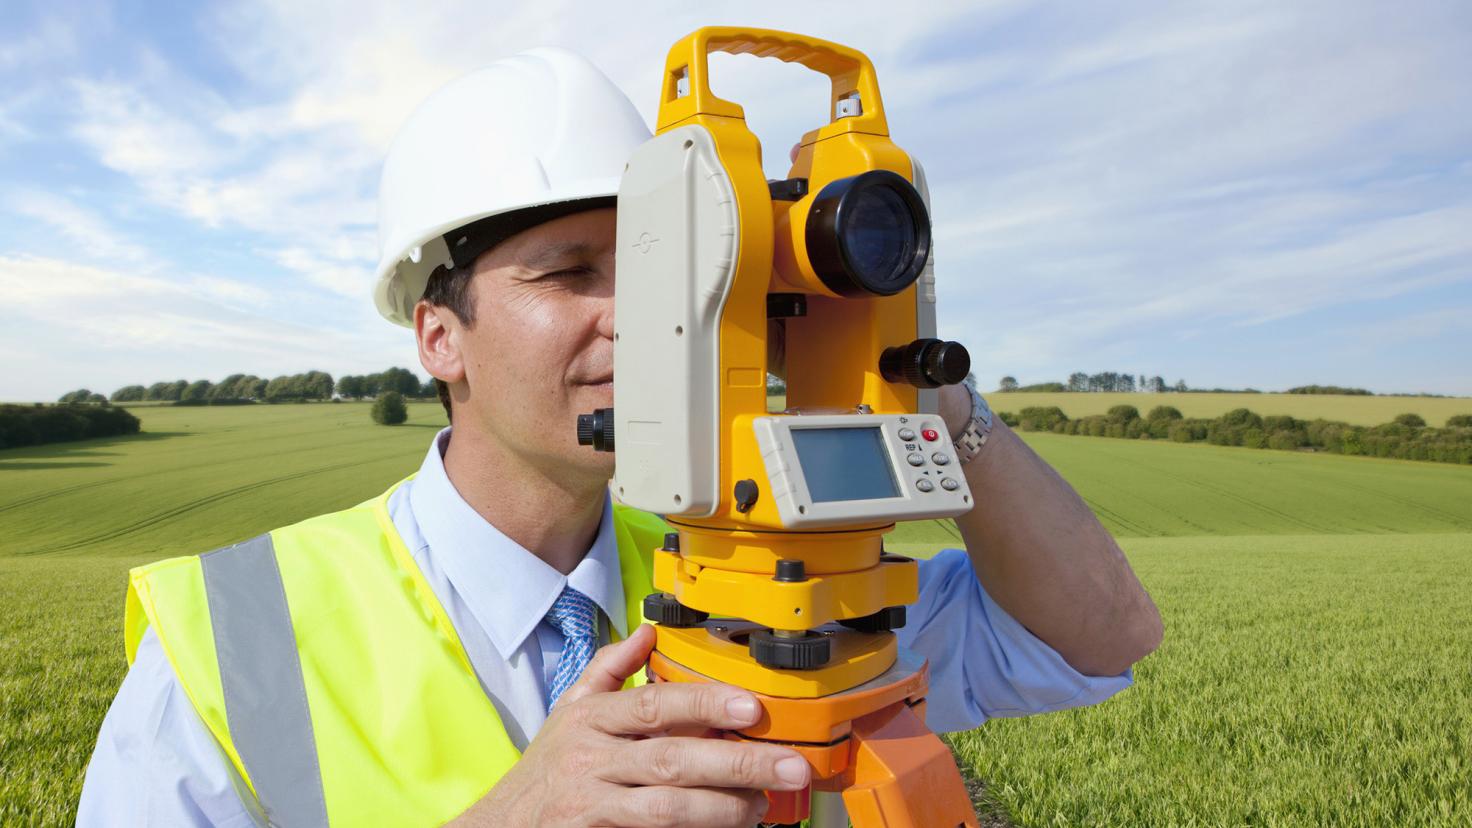 A man in a construction hat and vest stares into a surveying instrument